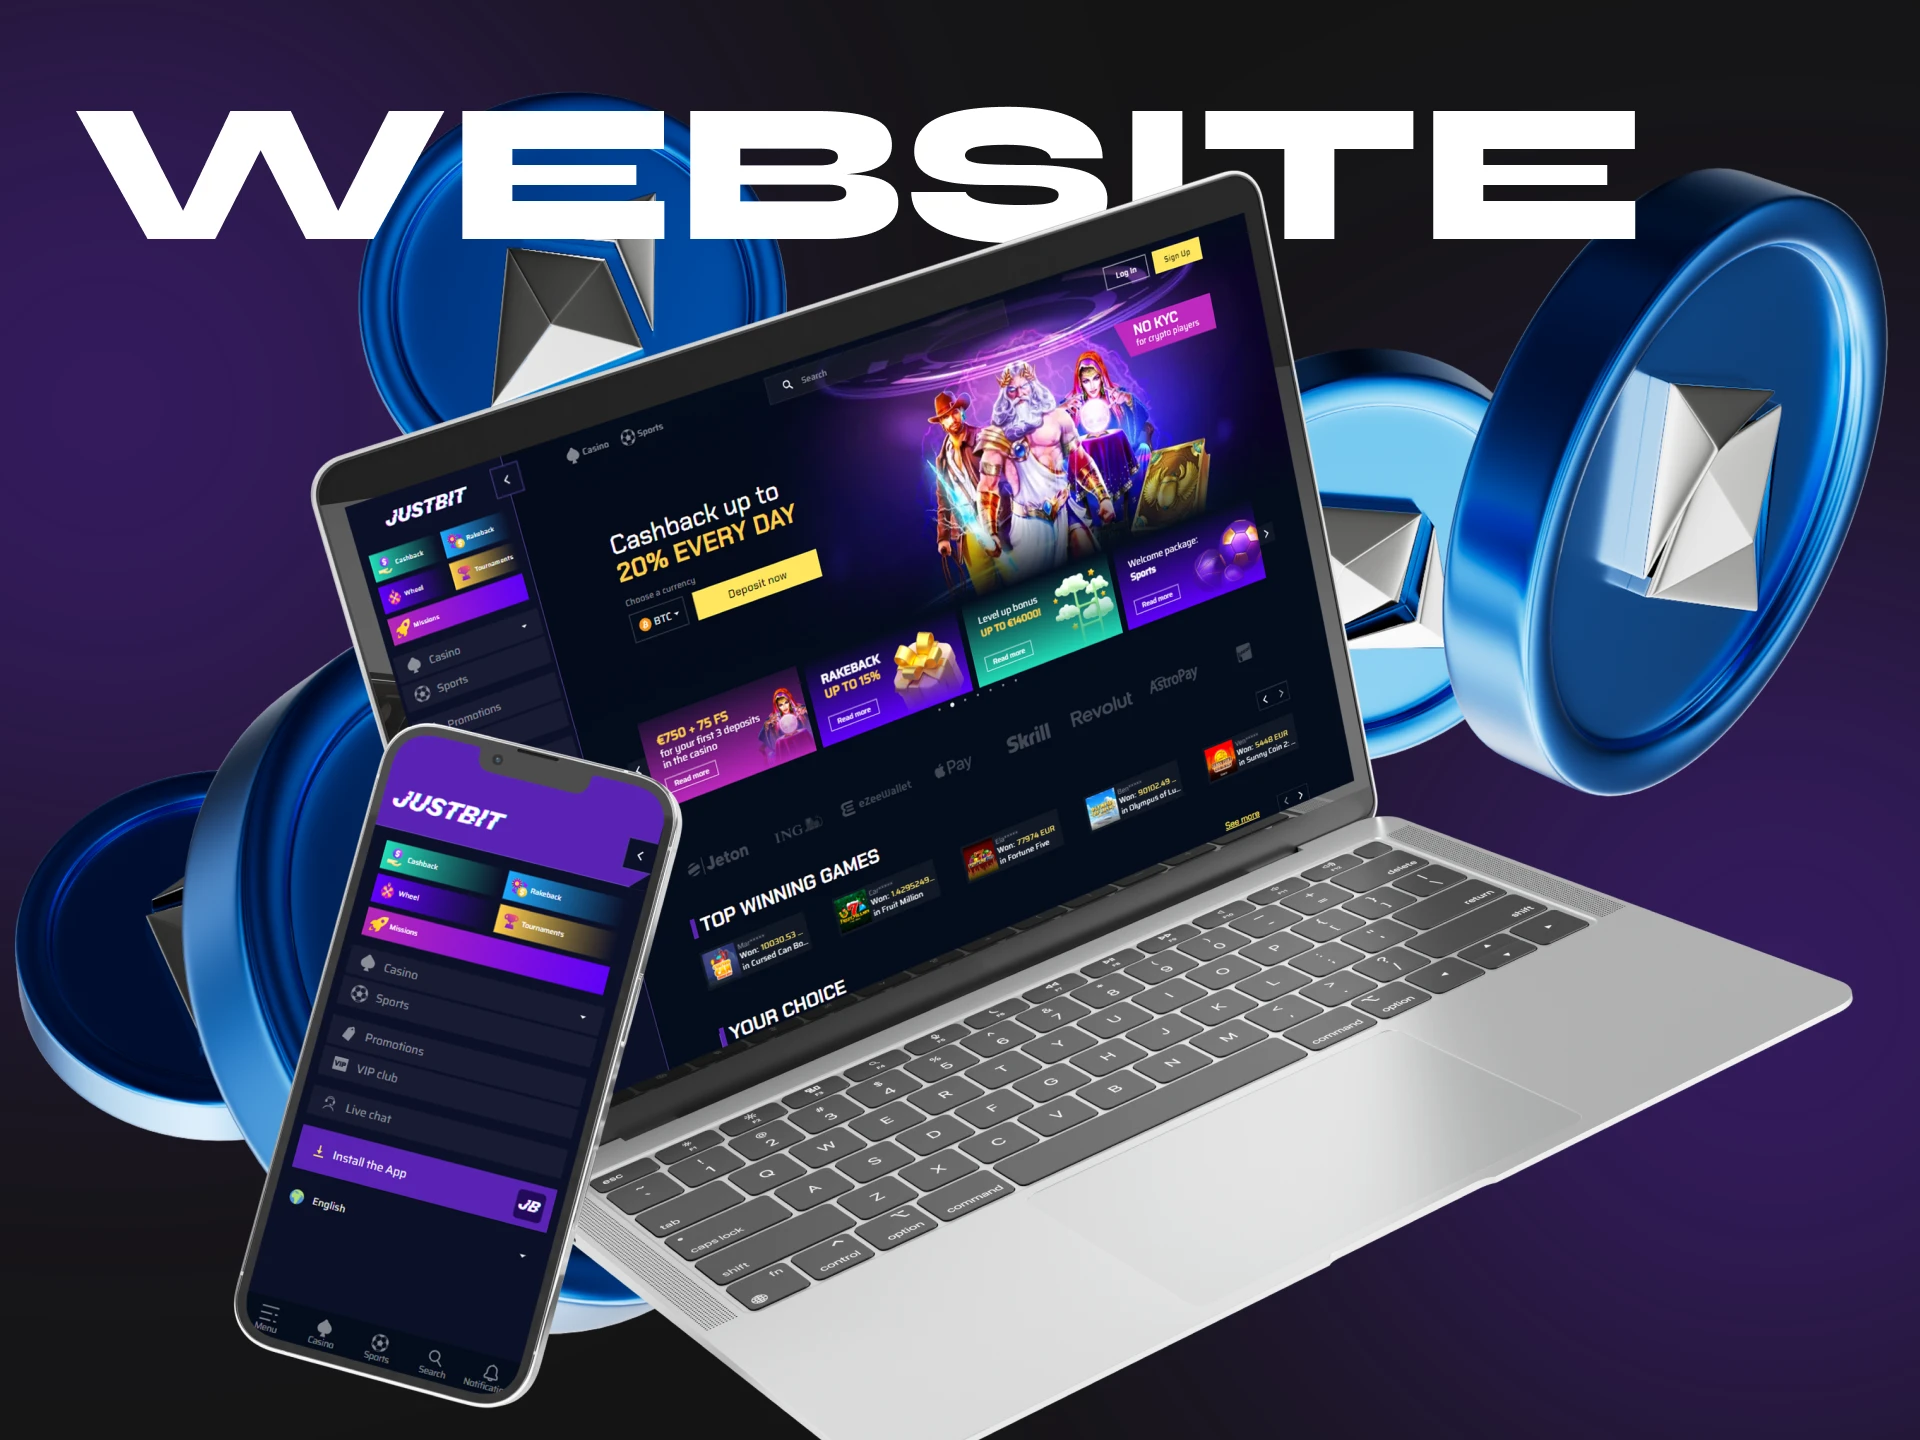 JustBit Casino is easily accessible through any web browser on your device.